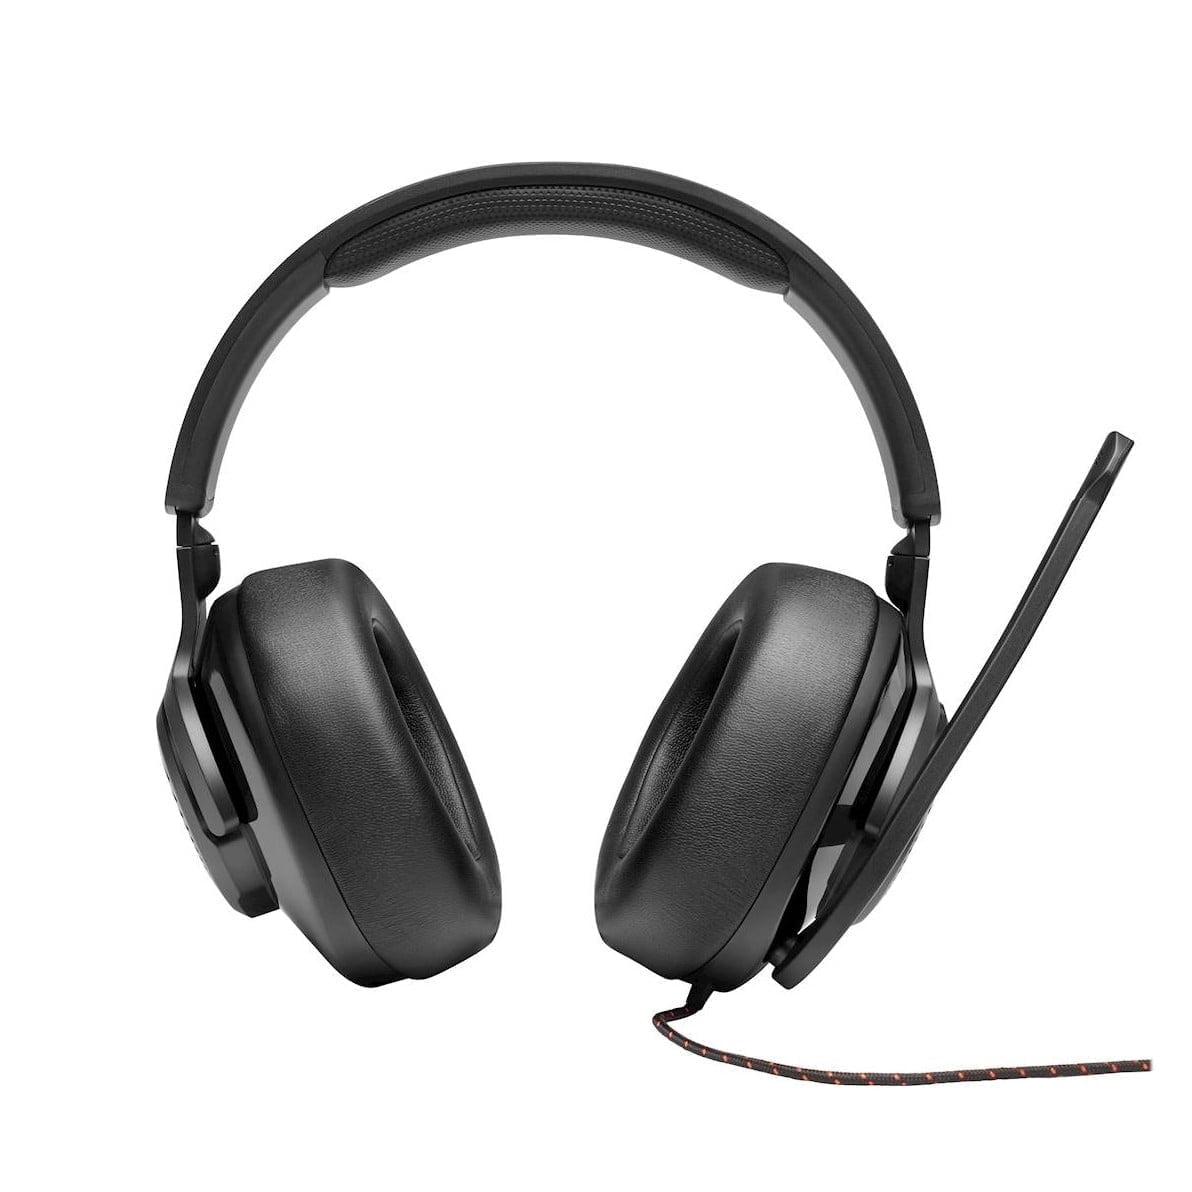 6408548Cv11D Jbl &Lt;H1&Gt;Jbl Quantum 300 Wired Stereo Gaming Headset For Pc- Black&Lt;/H1&Gt; Https://Www.youtube.com/Watch?V=Rqhjefasdky Enjoy Crisp Clear Audio With This Jbl Quantum Wired Gaming Headset. The Pu Leather-Wrapped Memory Foam Construction Provides Comfort Over Long Usage, While The 3.5Mm Input Cable Connects To Most Devices. This Jbl Quantum Wired Gaming Headset Features A Directional Microphone With Echo Cancellation Technology To Distinguish Background Noise For Clear In-Game Communication. Jbl Quantum Jbl Quantum 300 Wired Stereo Gaming Headset For Pc- Black